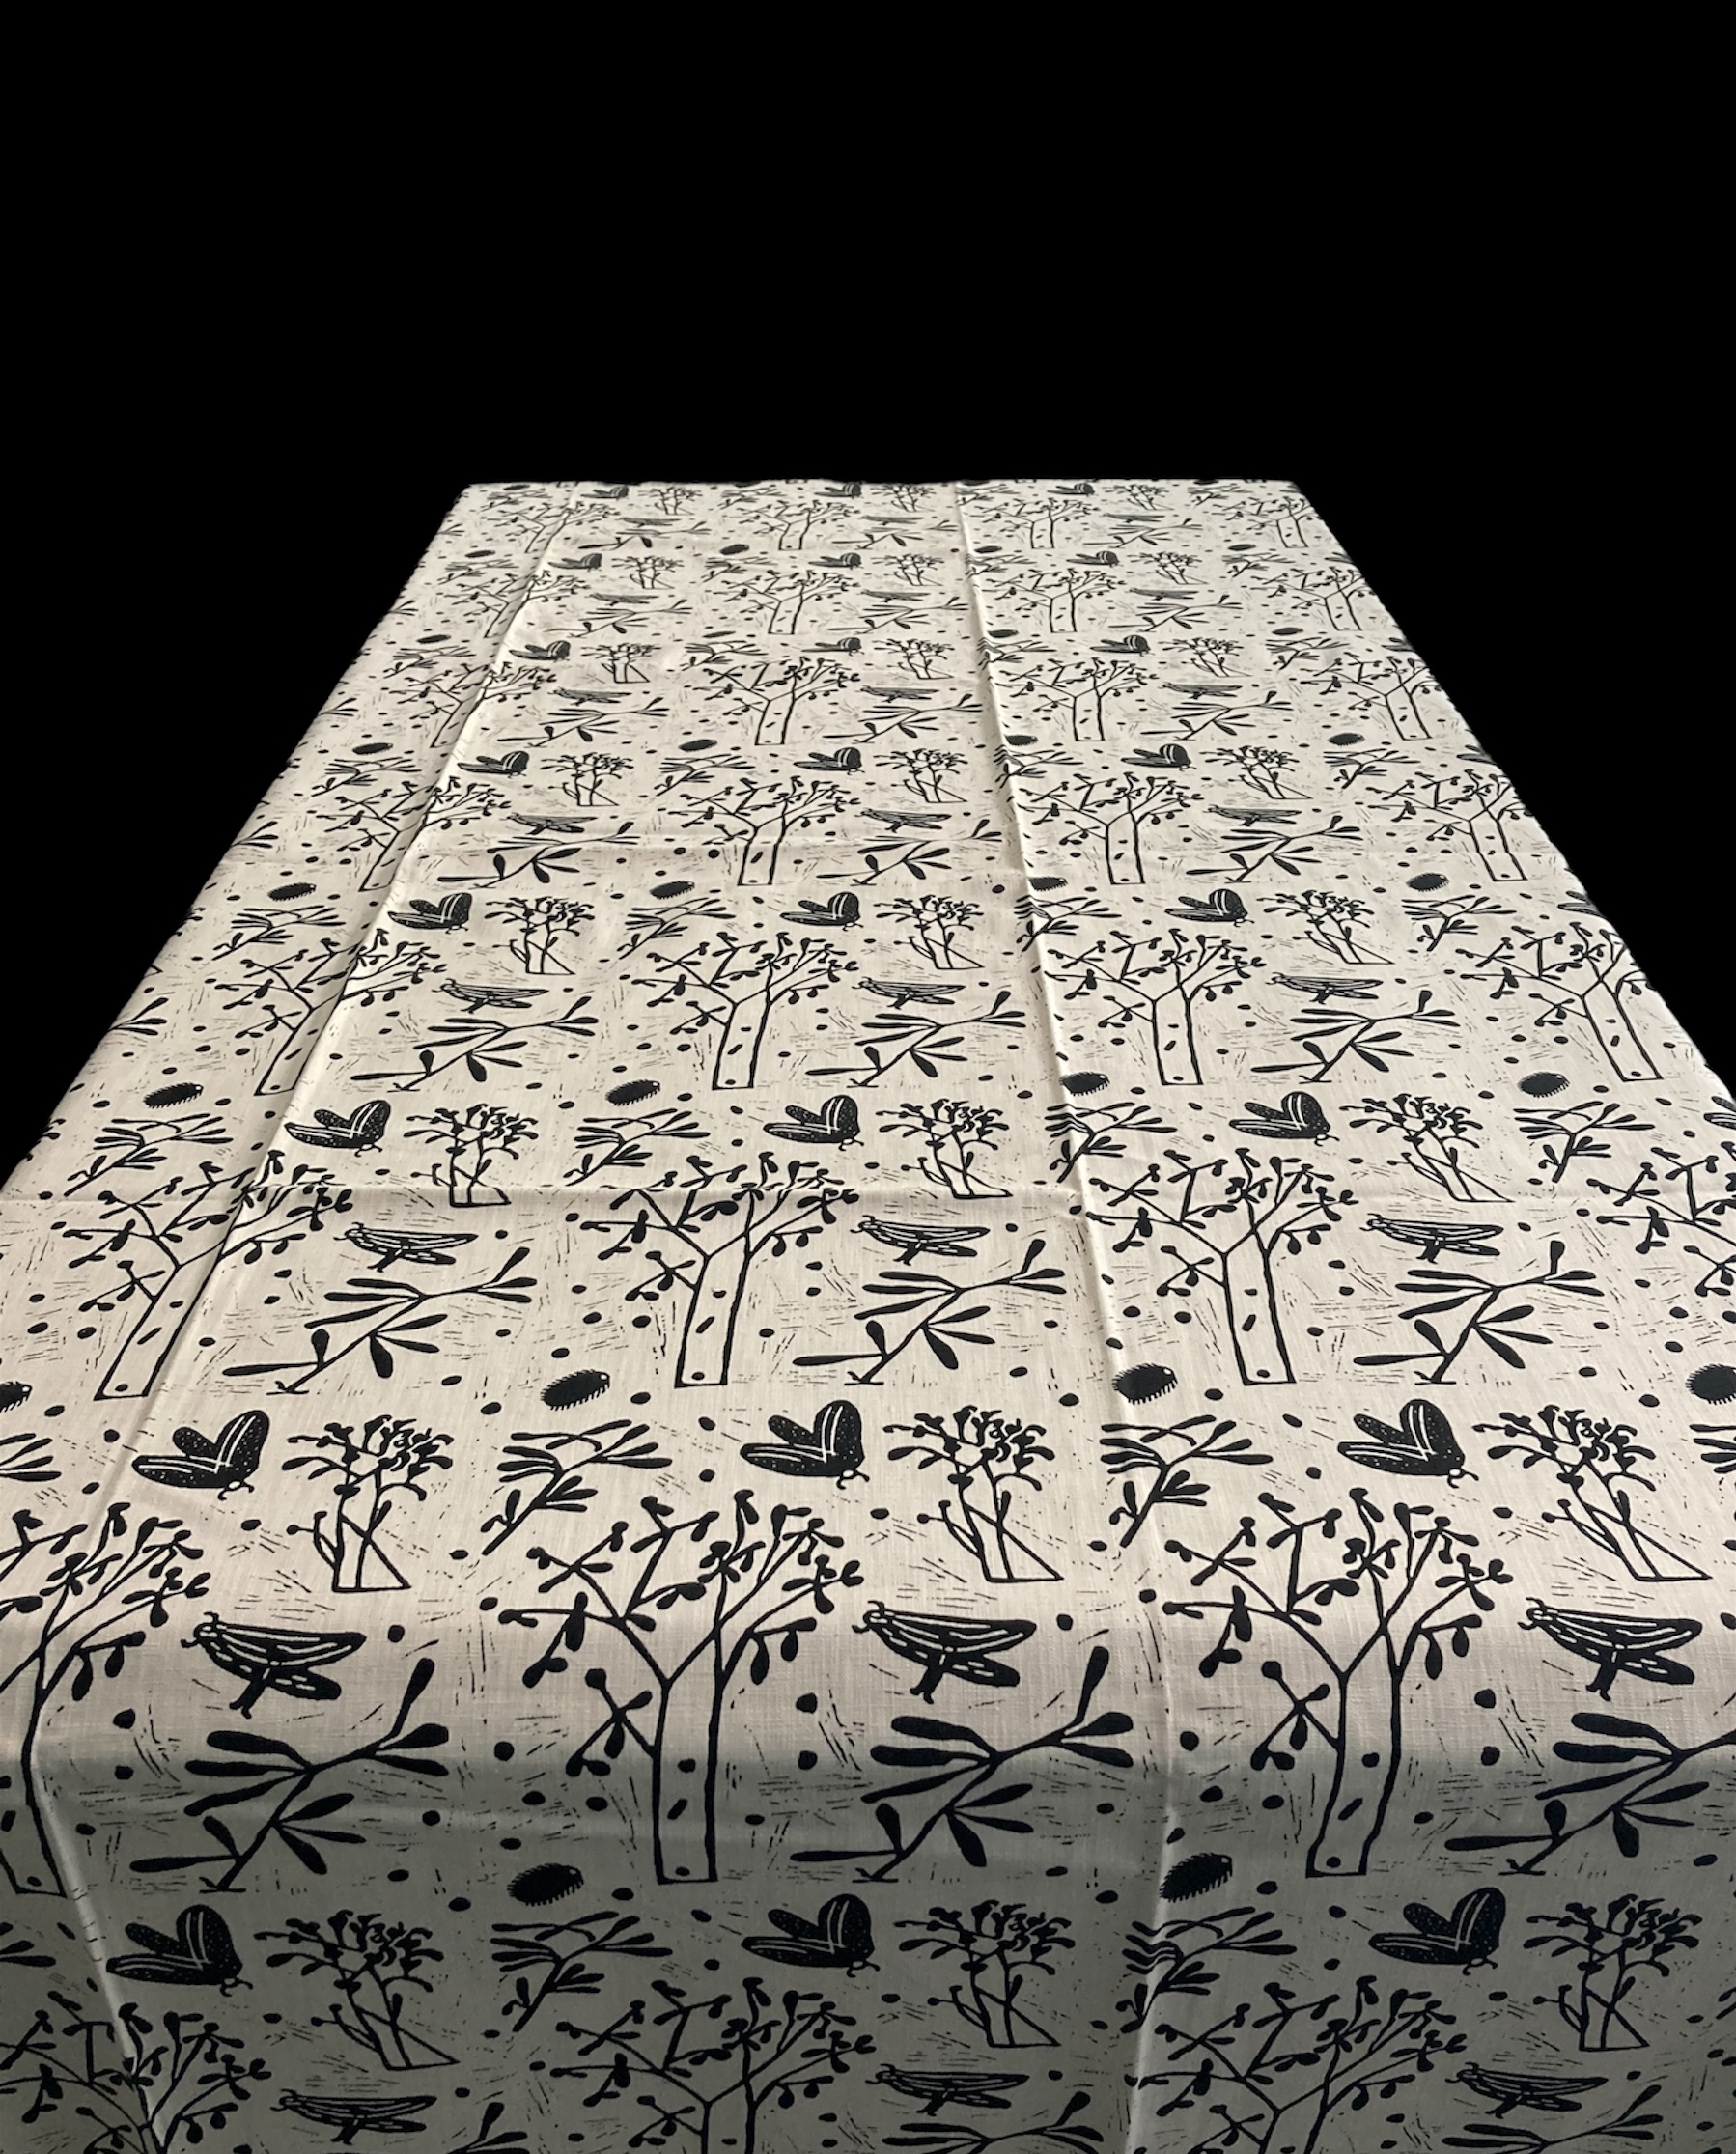 100% cotton Tablecloth approx. 87" x 57" from Namibia - # bw05t